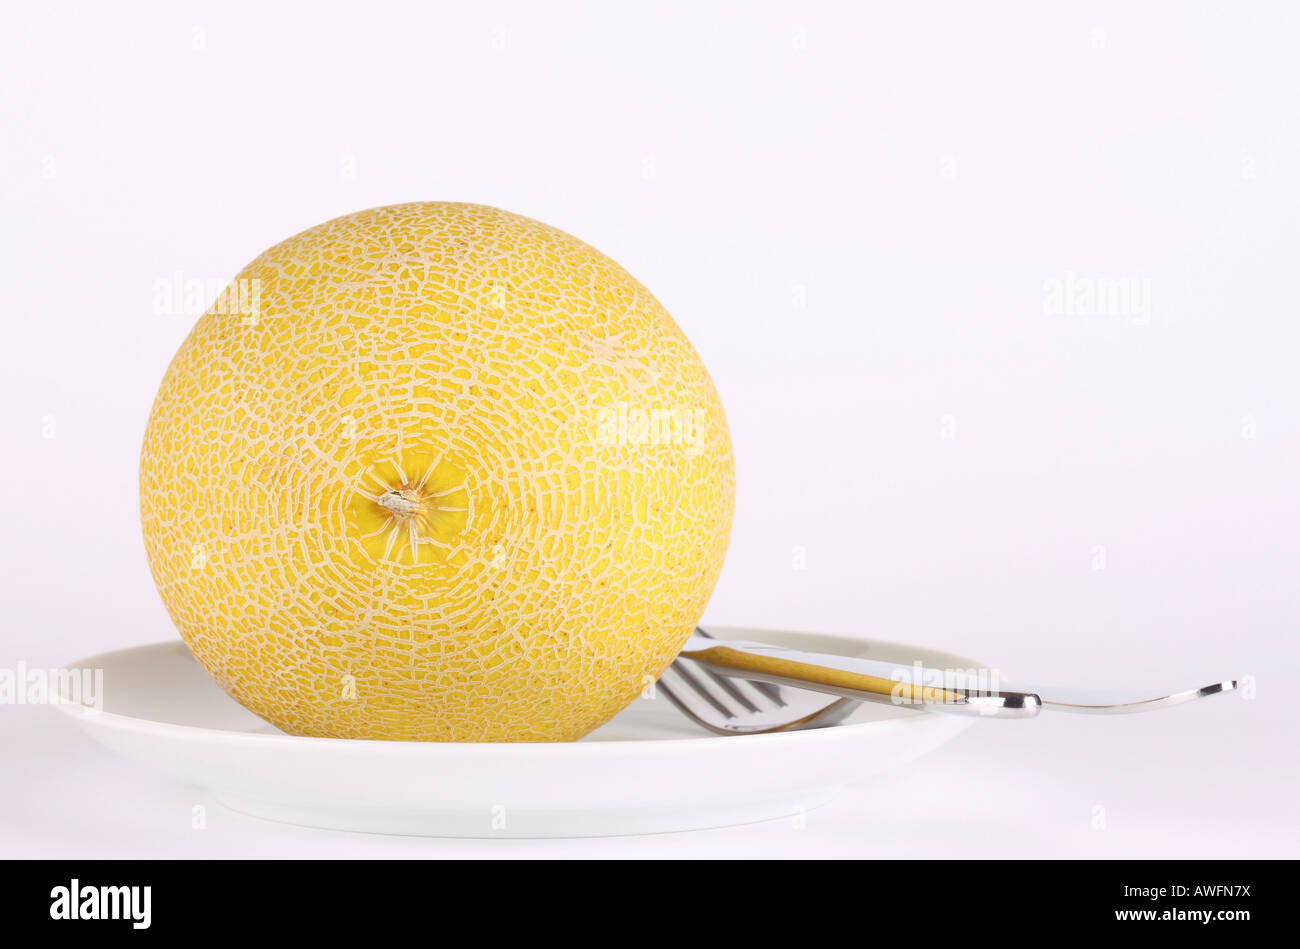 Melon on a plate with cutlery Stock Photo